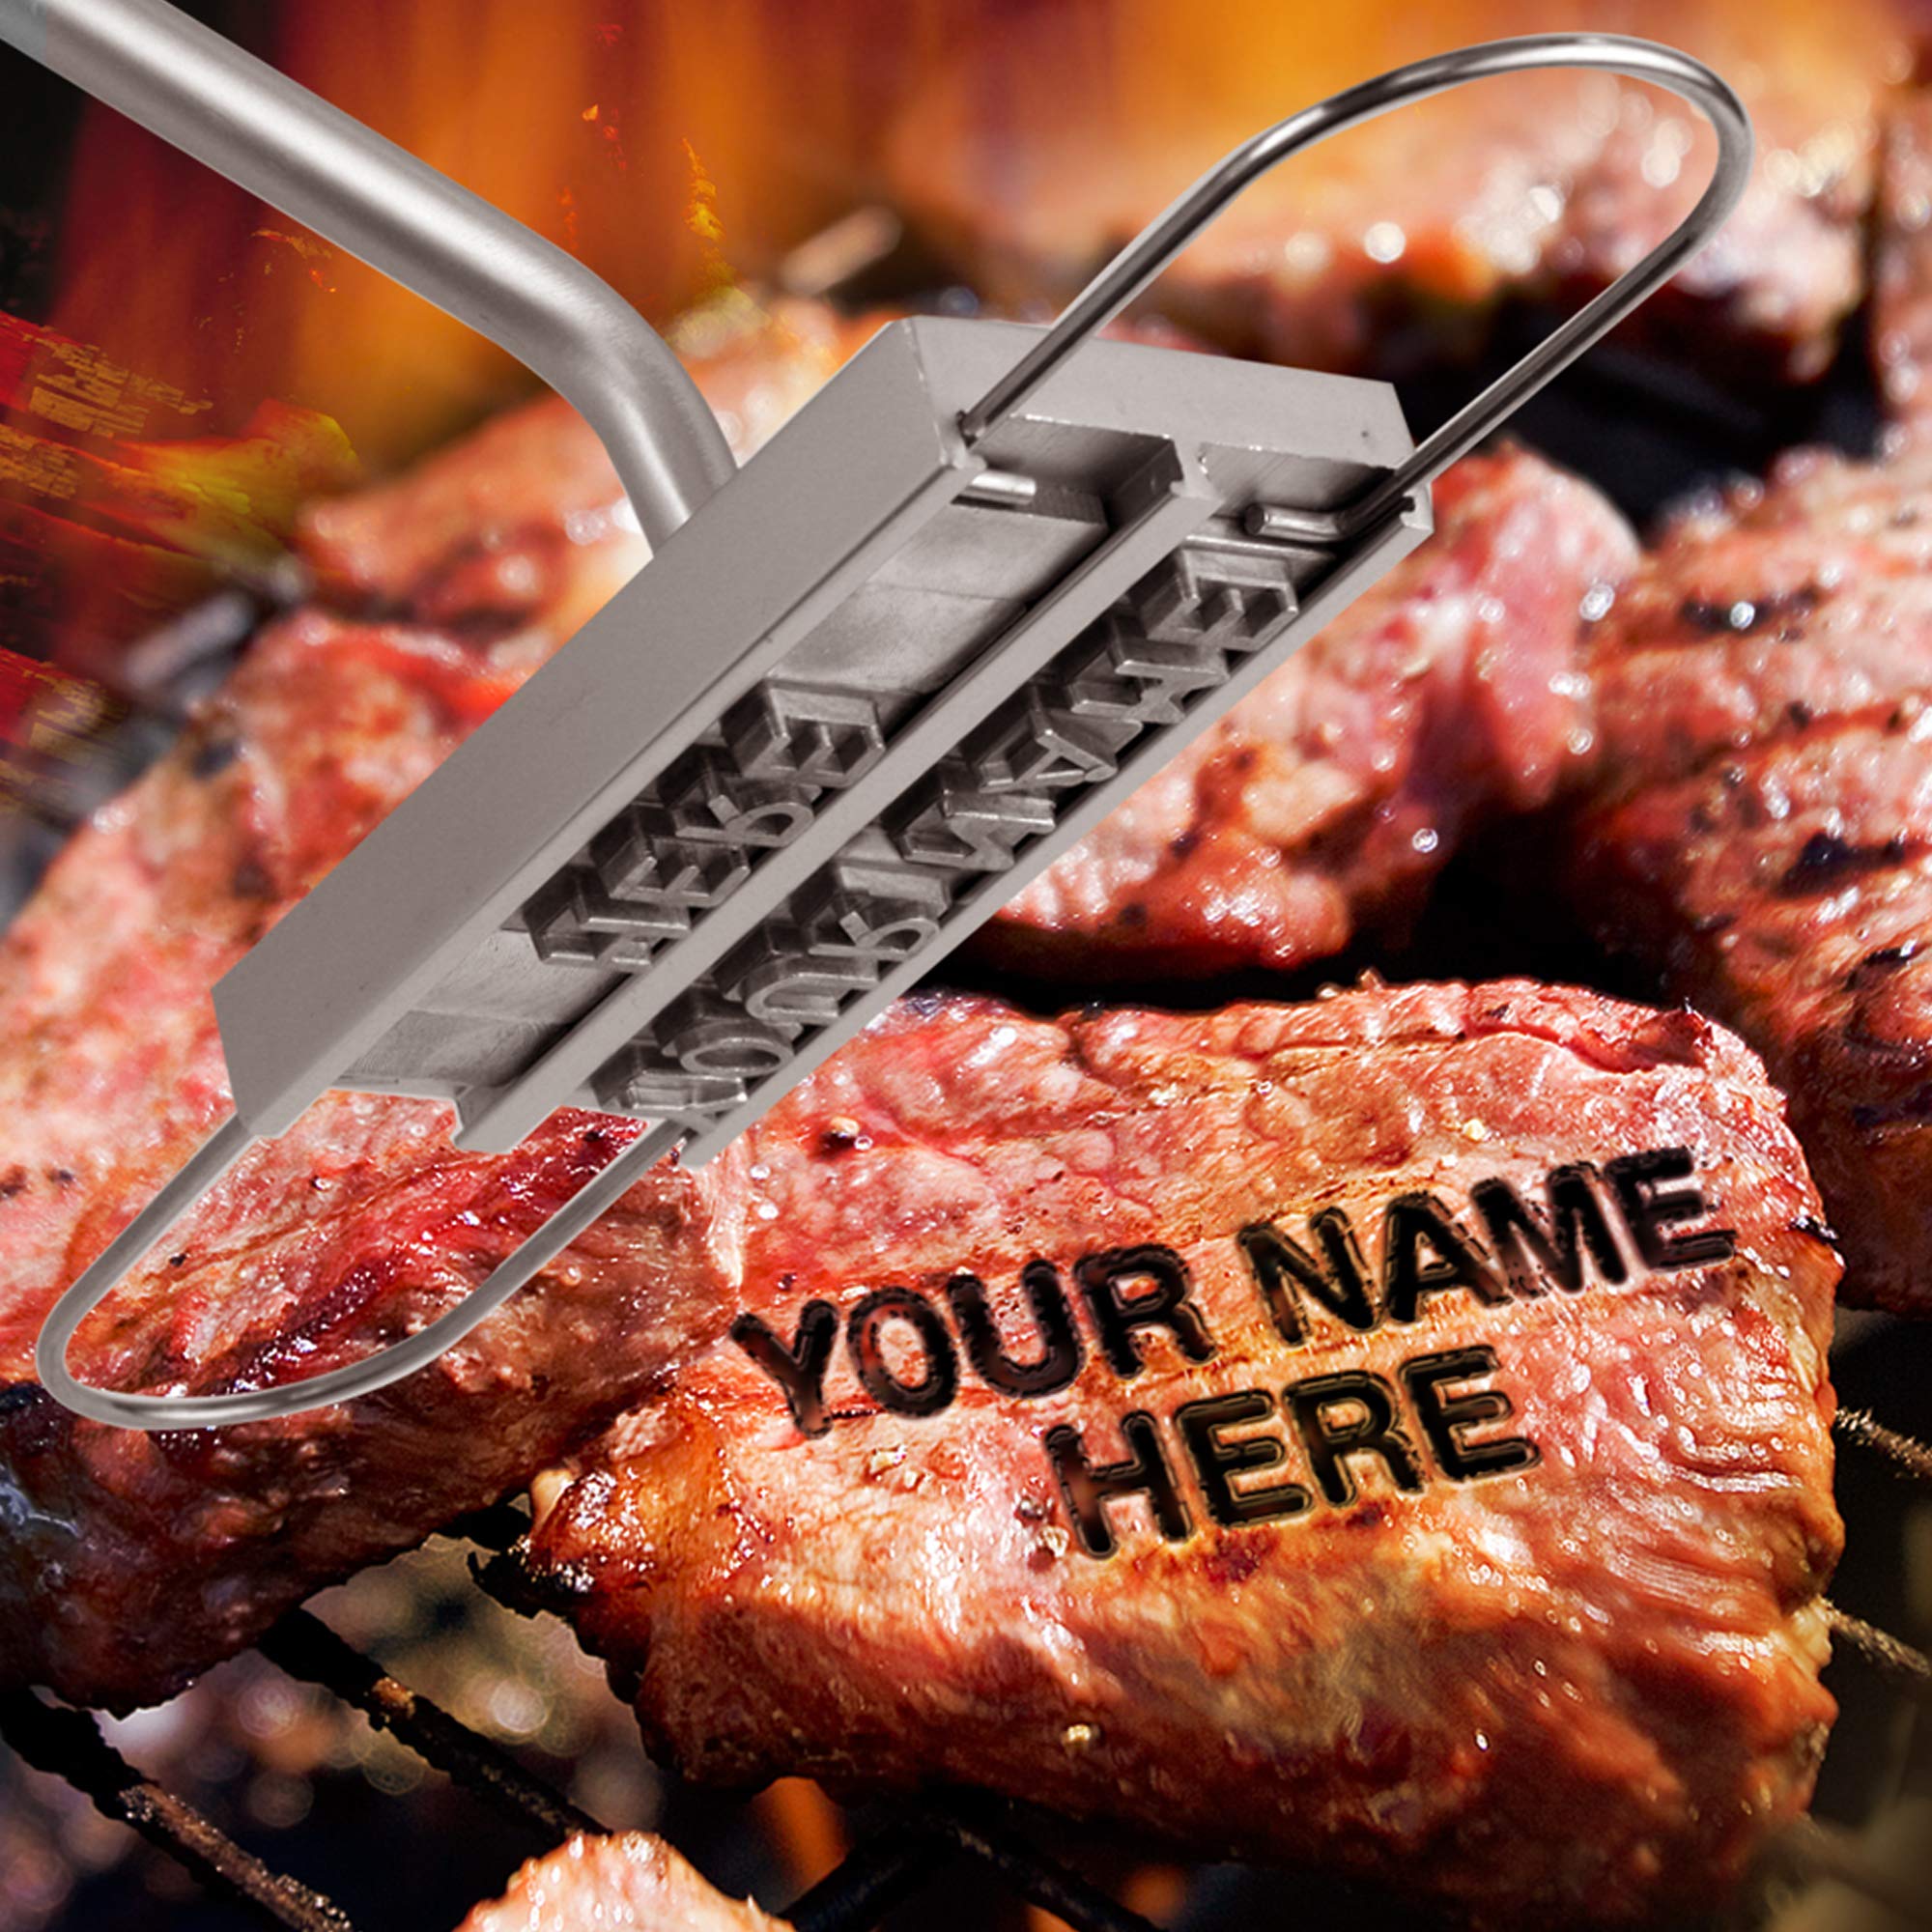 The Barbecue Stamp BBQ Luckies Of London BBQ Branding Iron 